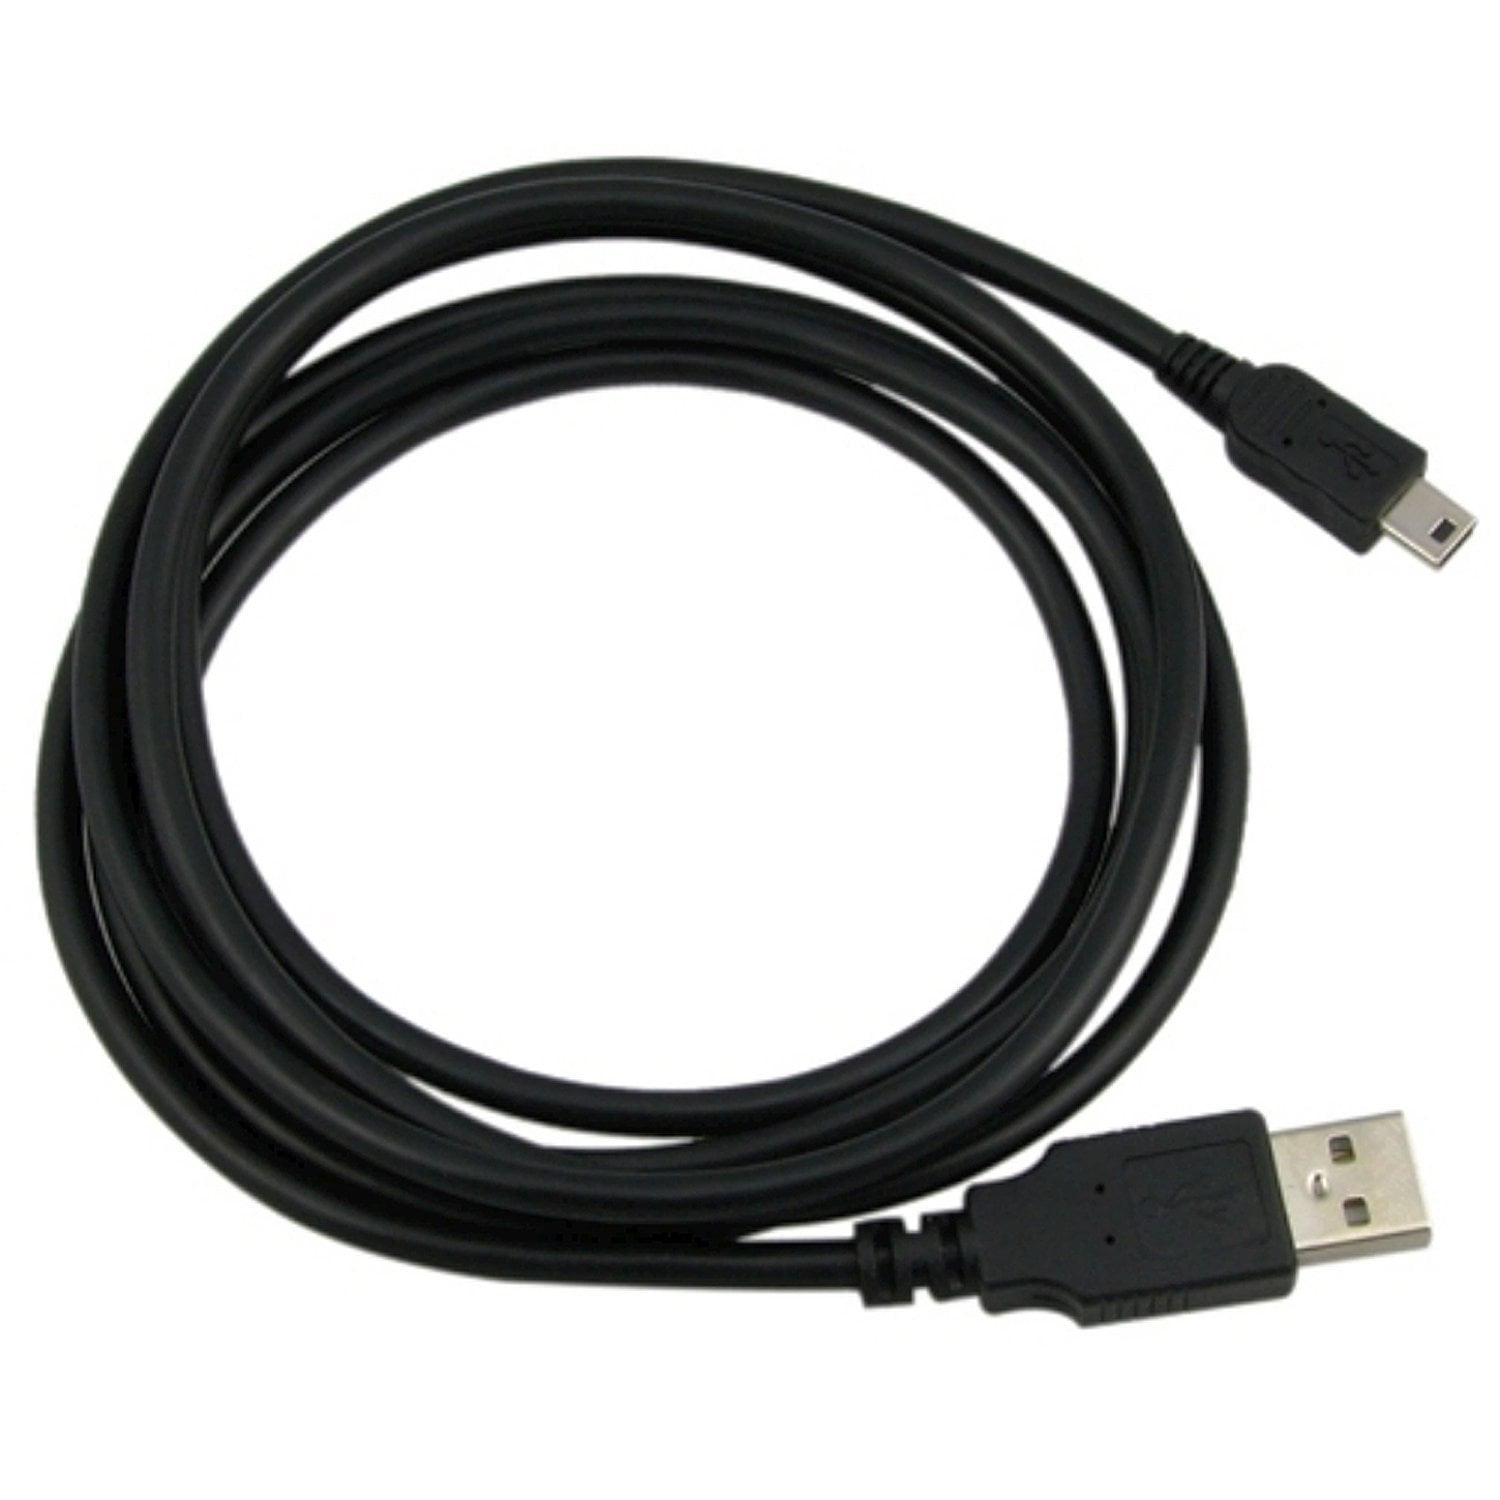 6ft USB Cable Cord for Fujitsu Scansnap Scanner iX500 S1100i S1300i S1500 S1500M